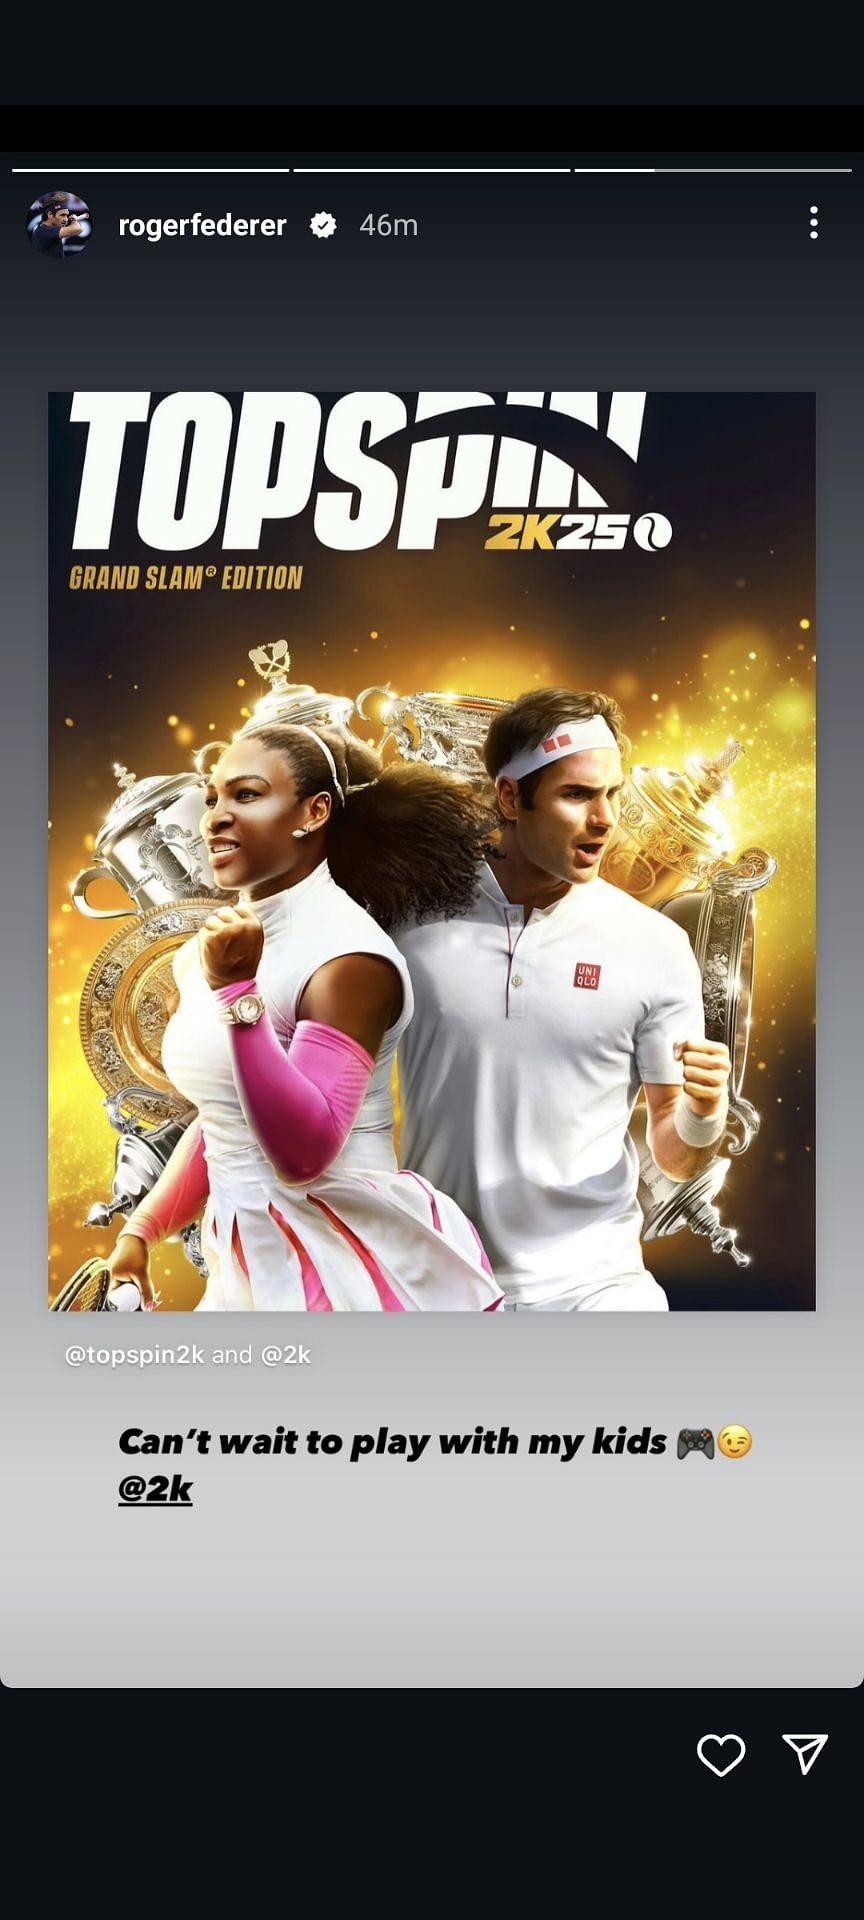 Roger Federer&#039;s Instagram post on his excitement to play Top Spin 2K25 with his children